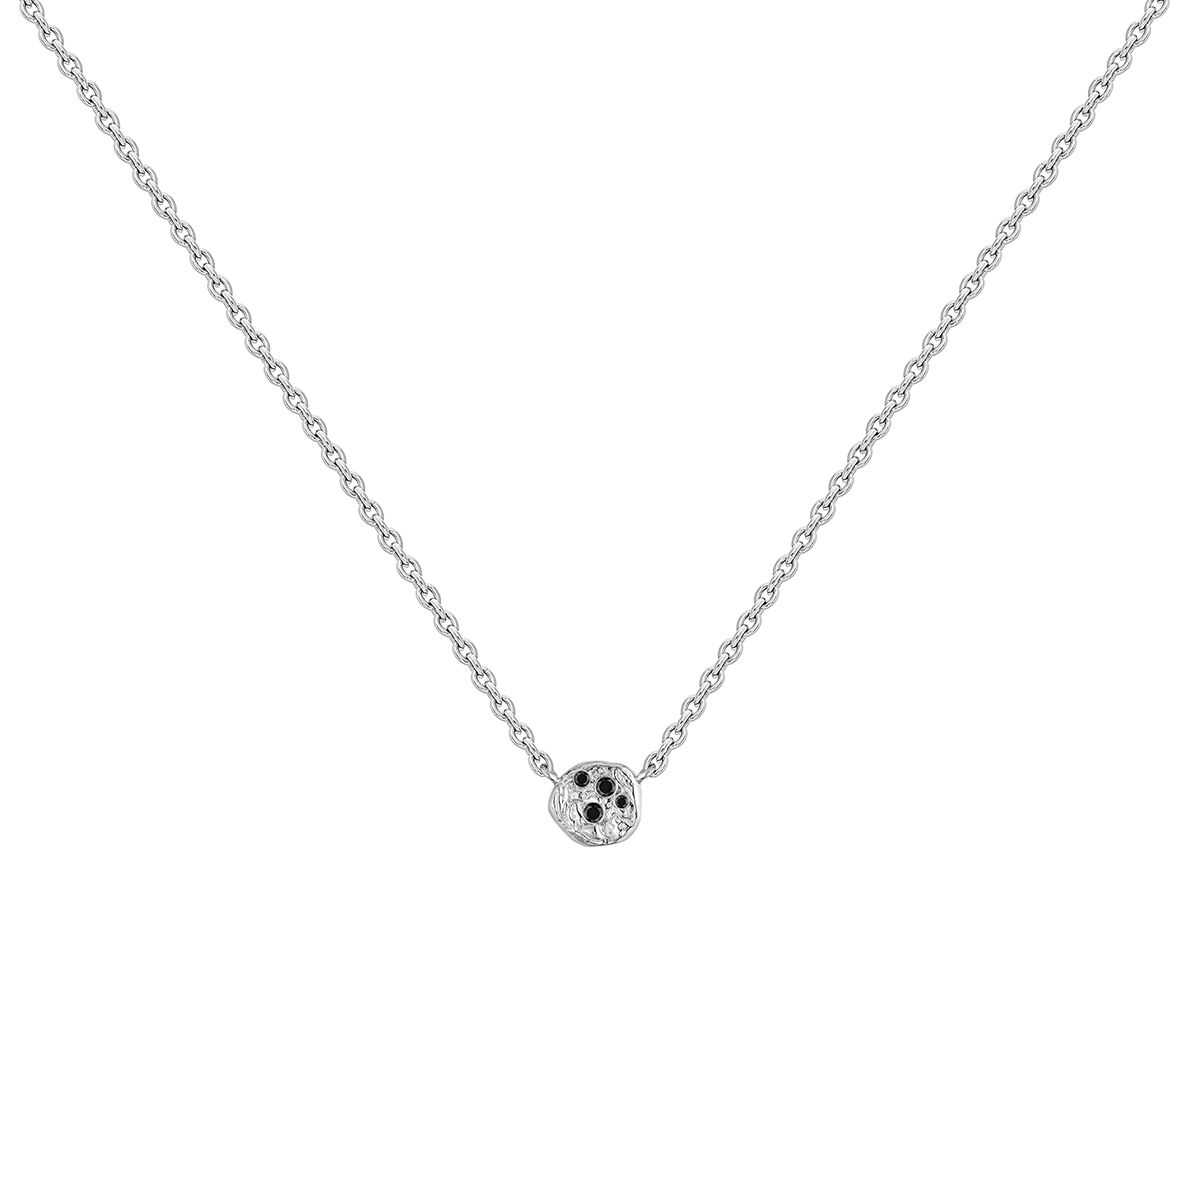 Silver necklace with raised detail and black spinel gemstones, J05078-01-BSN, hi-res